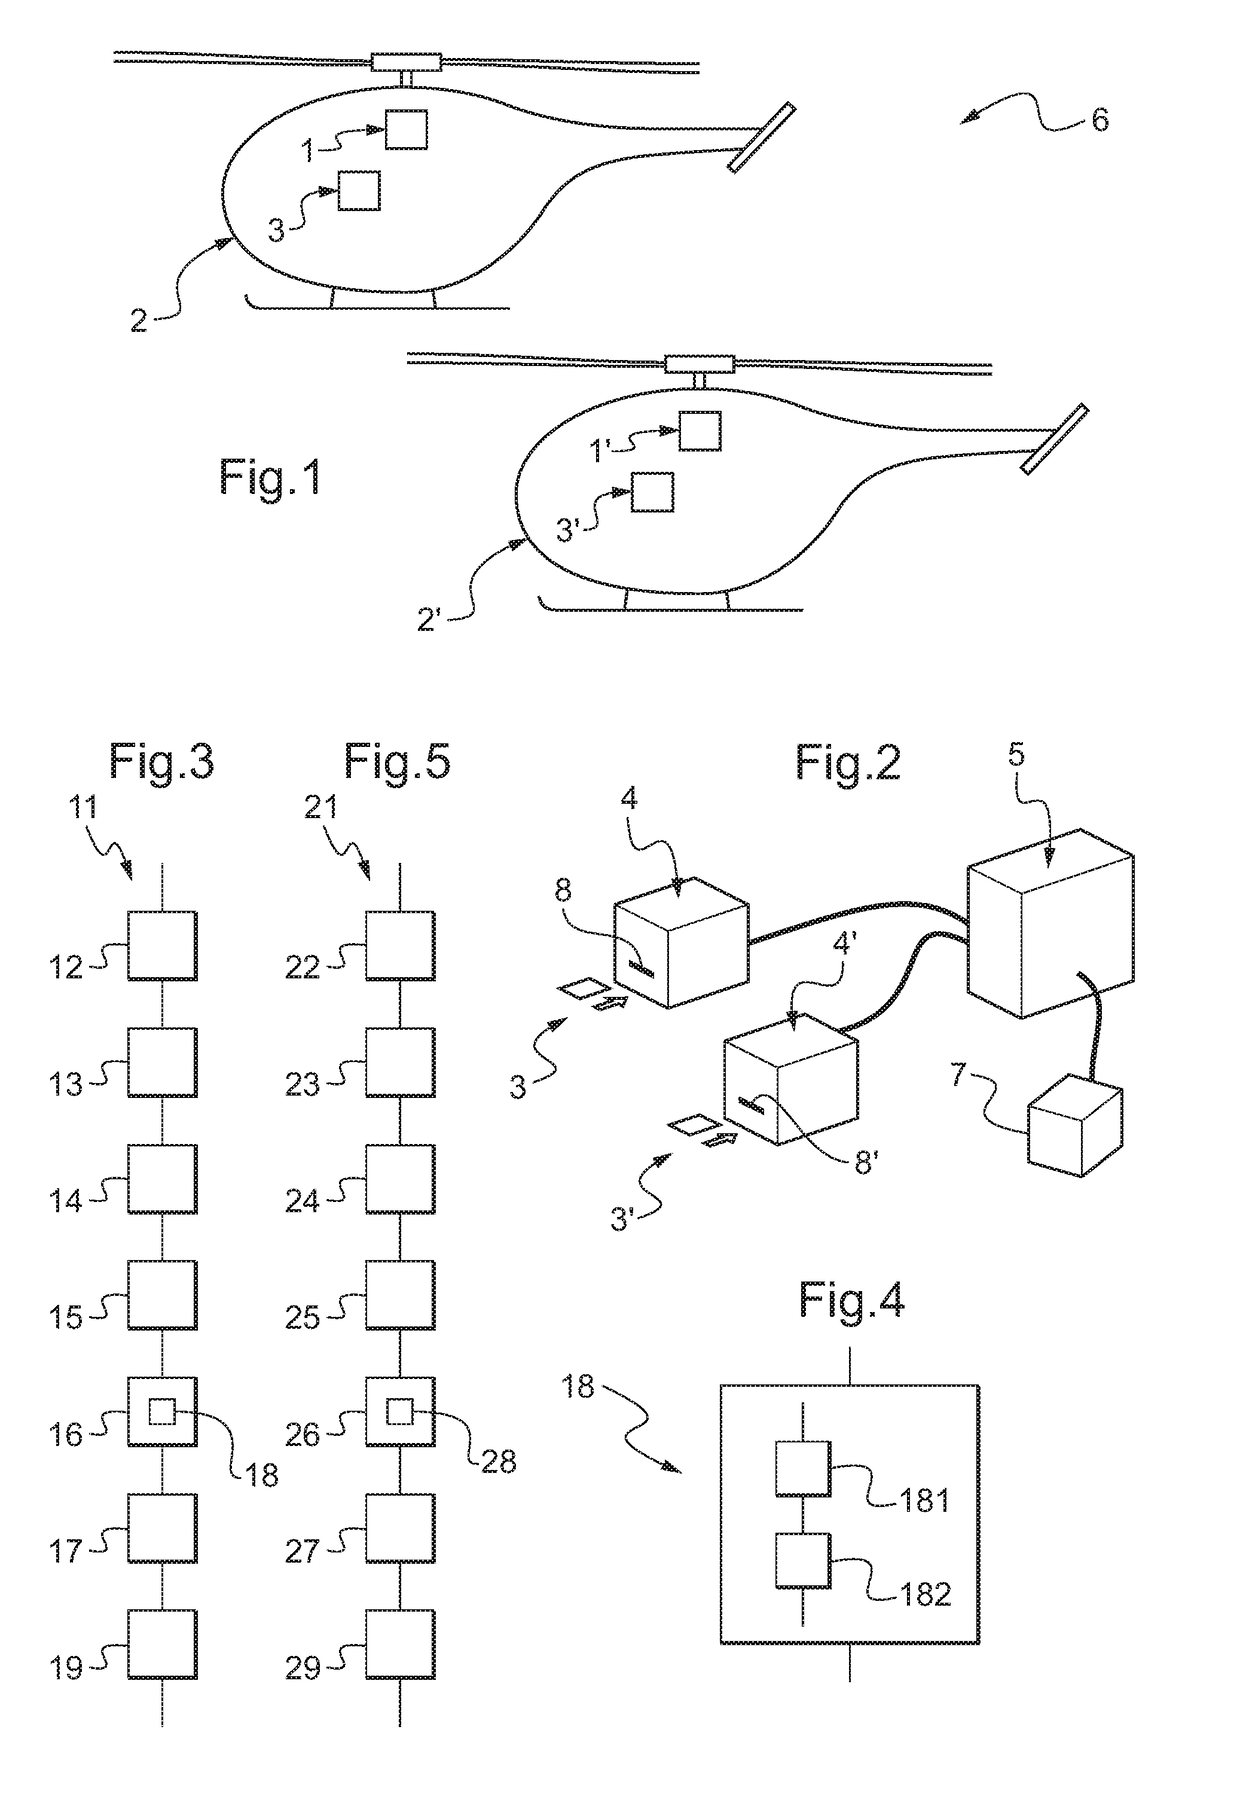 Method of analyzing variations of at least one indicator of the behavior of a mechanism fitted to an aircraft